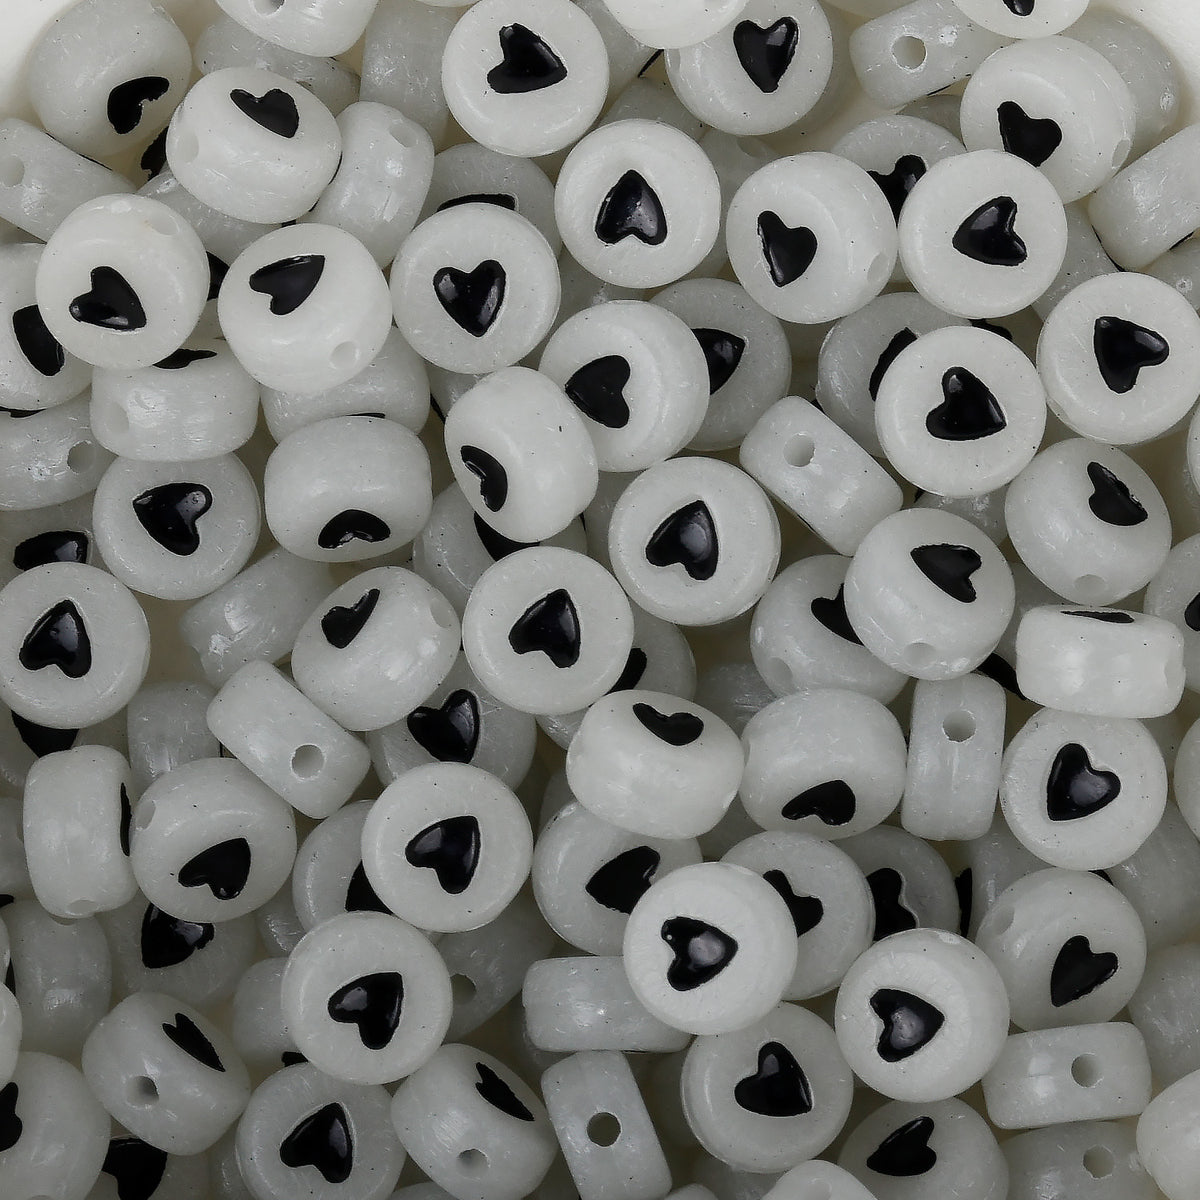 Stock Beads/Random Mixed Beads 500g/bag (Can't Pick )